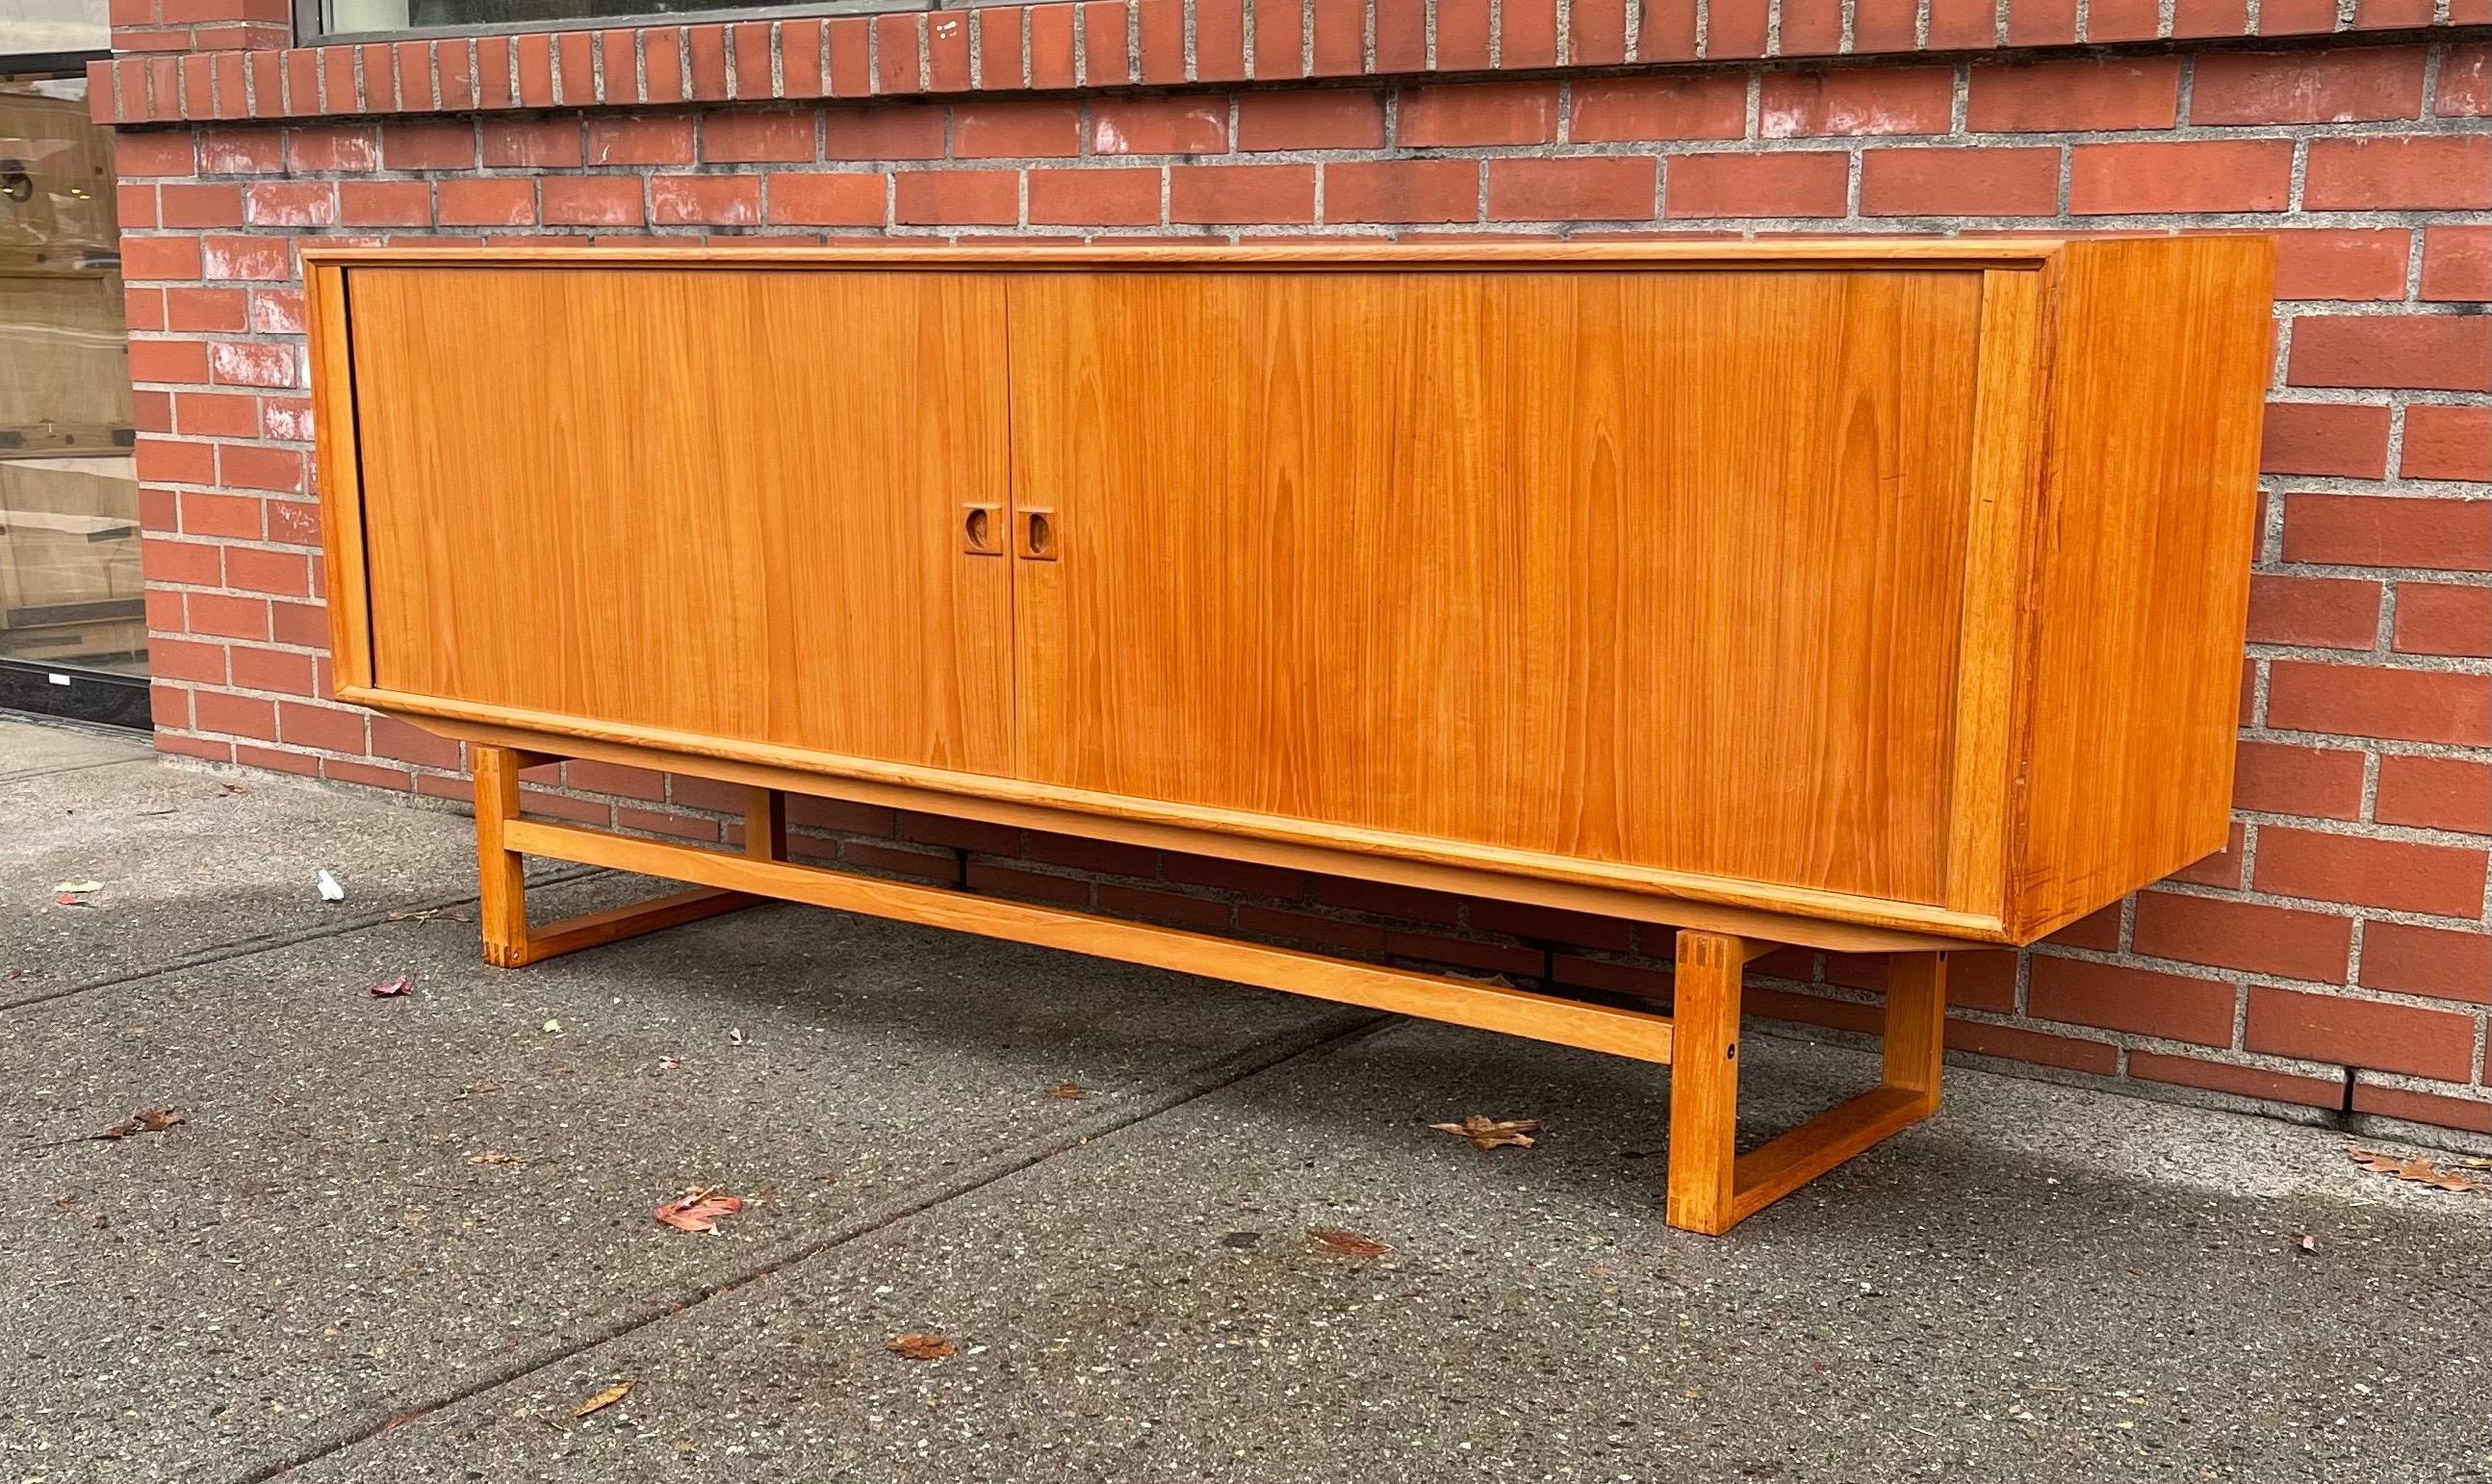 Wonderful Danish design sideboard from the 1950s. The sideboard is made from teak and has beautiful tambour doors who disappear completely when opened. Characteristic for this sideboard is the square base that gives the sideboard a very clean and